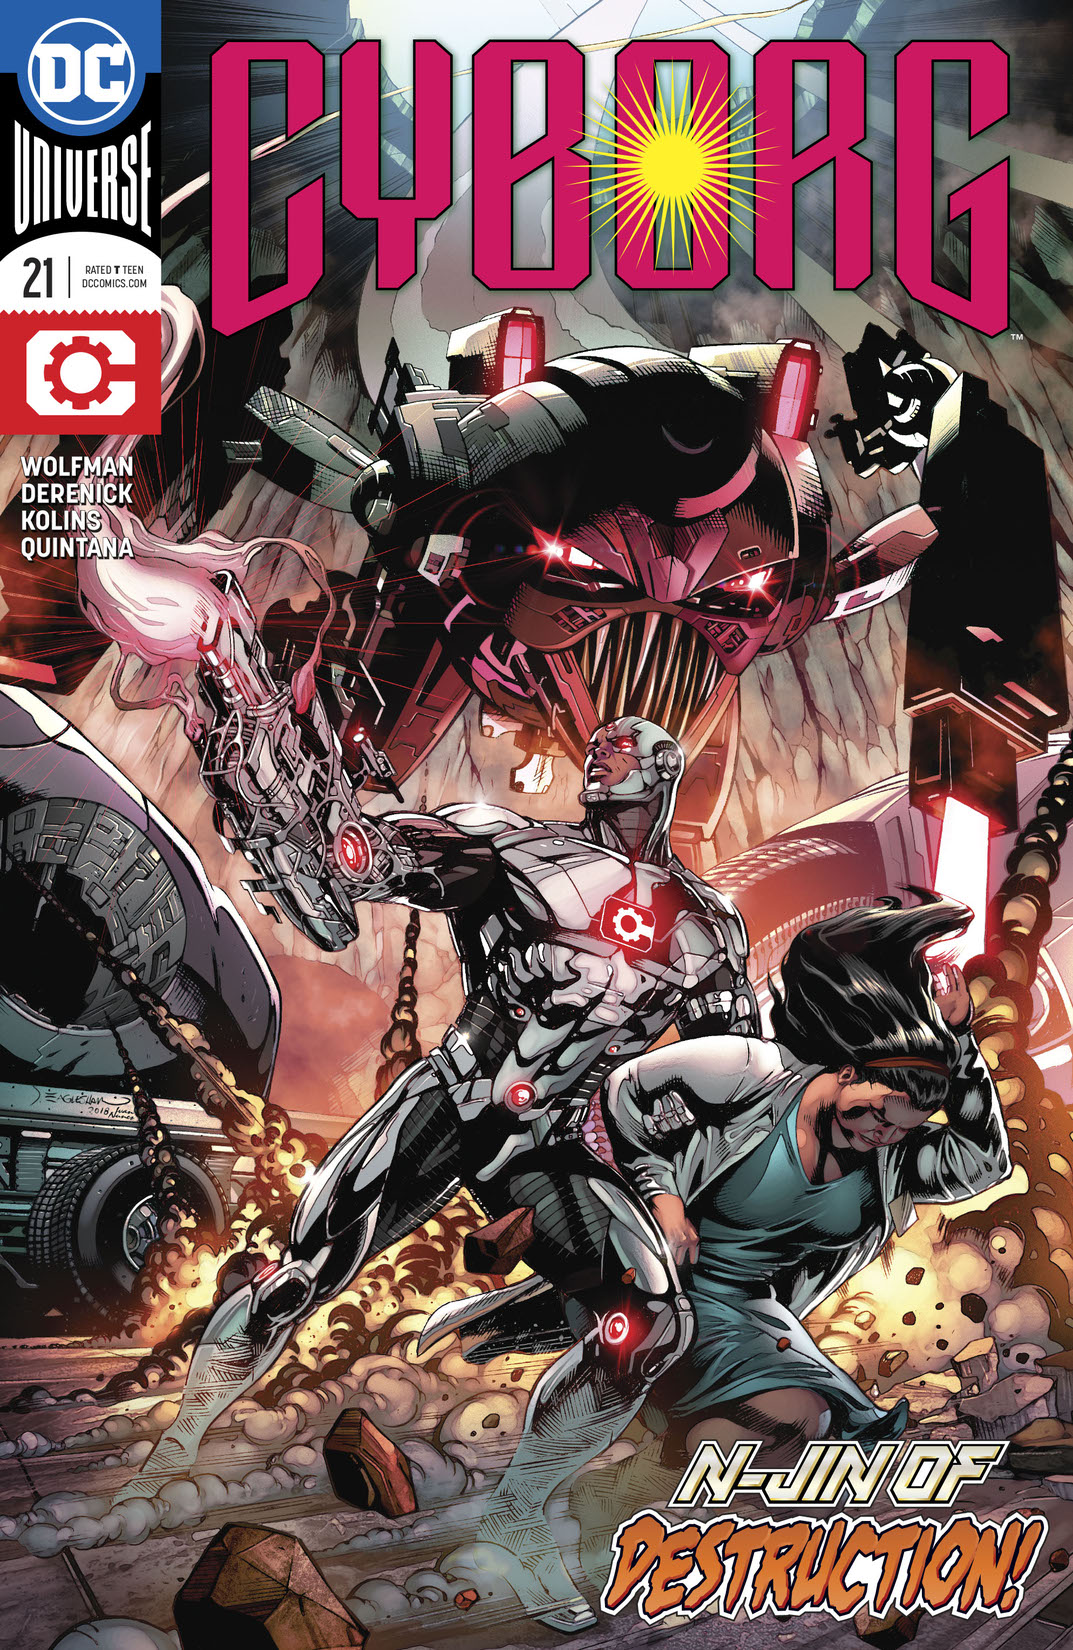 Cyborg (2016-) #21 preview images